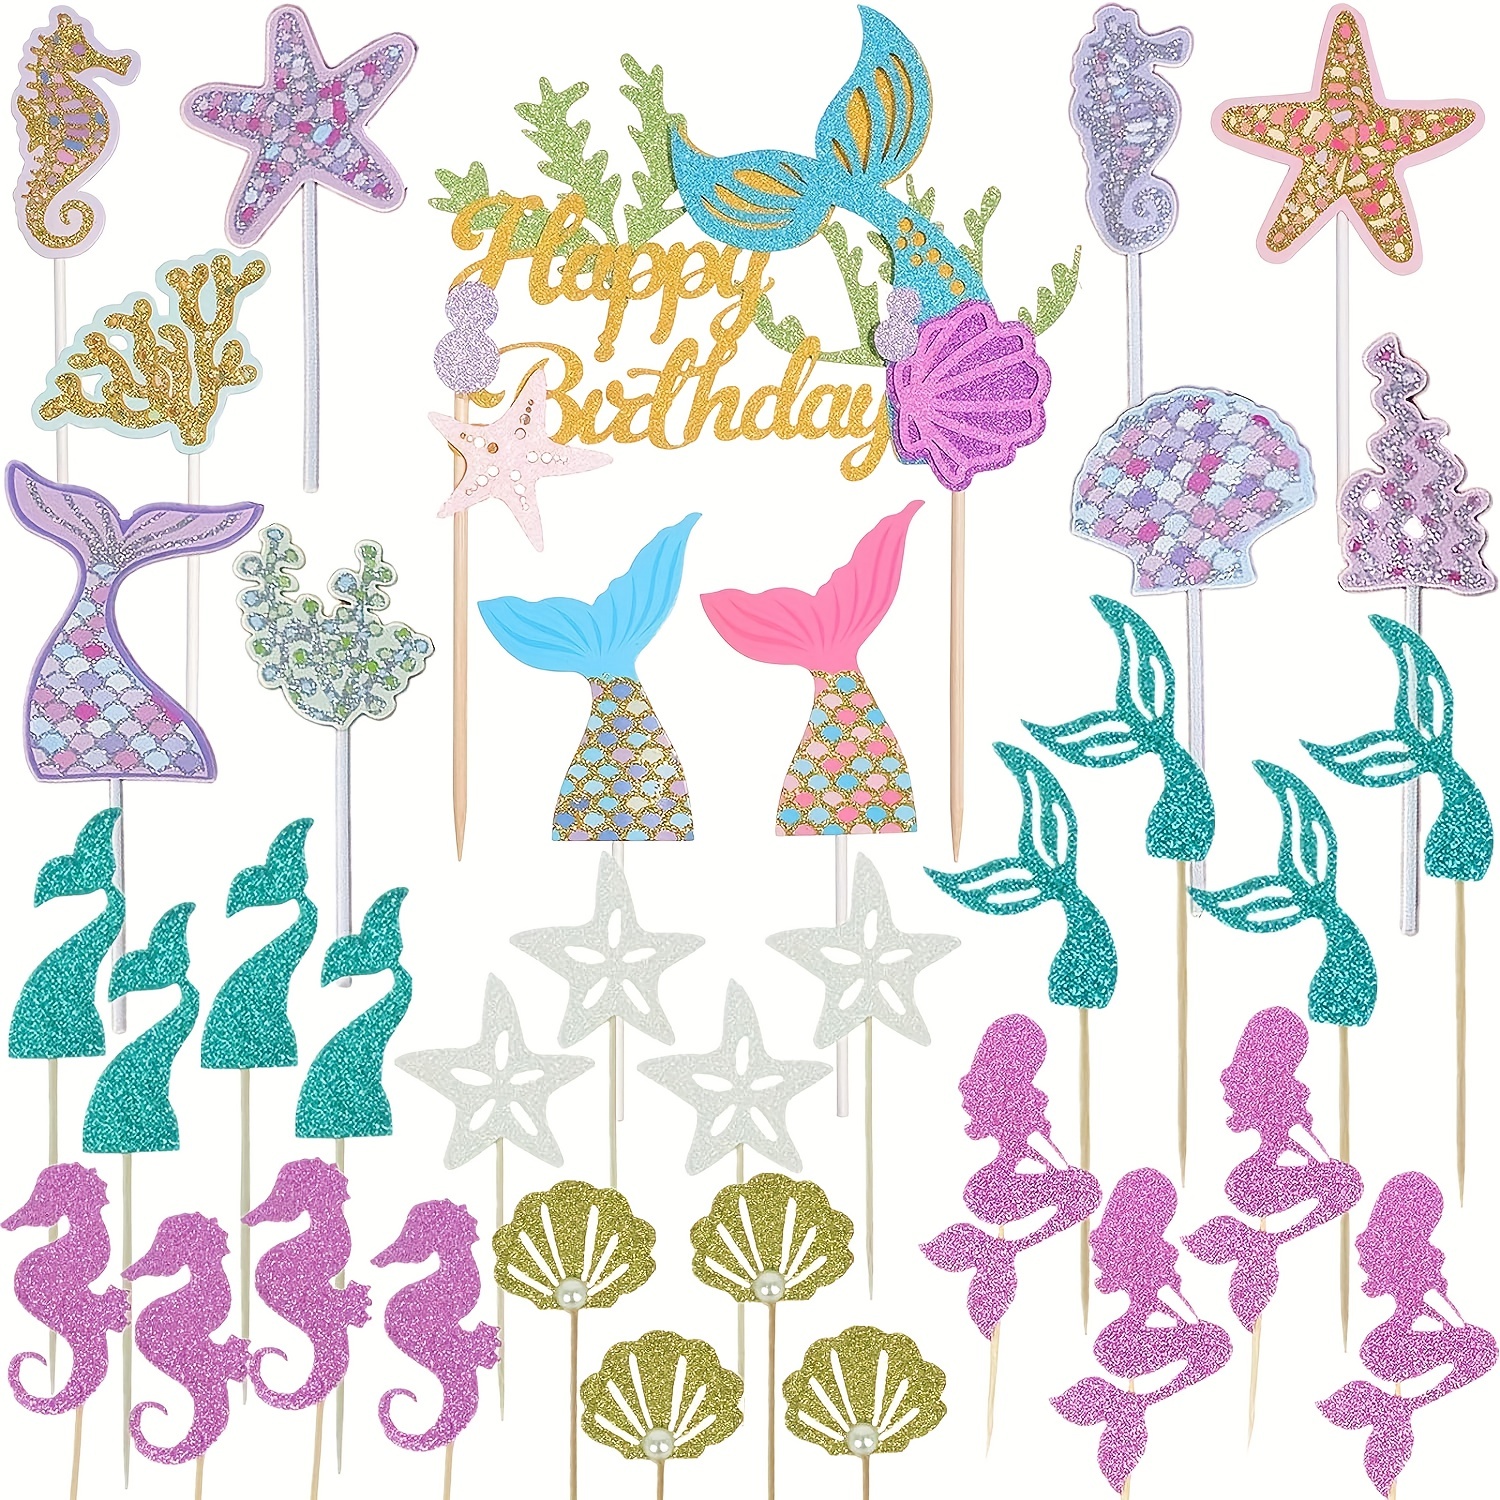 

36pcs Glitter Mermaid Theme Birthday Cake Topper Under The Sea Party Supplies, Cake Decoration Cupcake Toppers, Mermaid Cupcake Toppers For Girl Birthday Party Cake Decorations, Birthday Cake Toppers